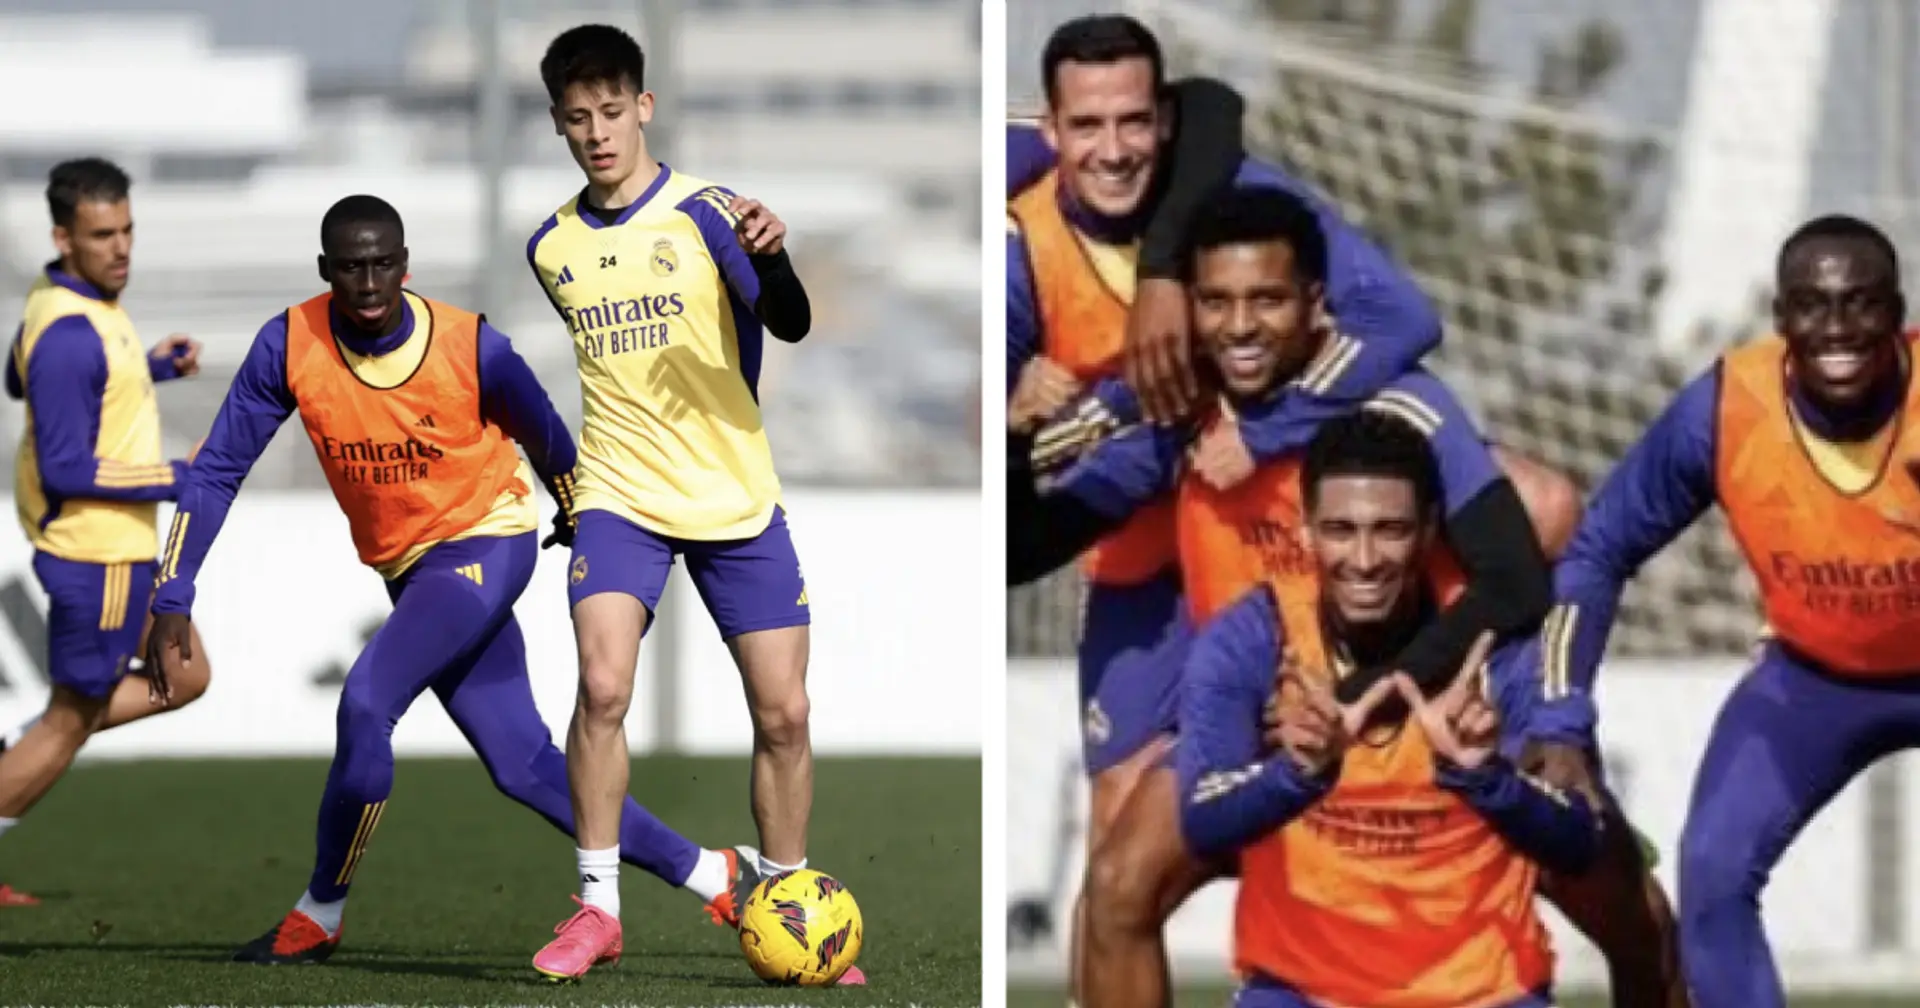 10 best pics from Real Madrid's latest training session – featuring Arda Guler and the winning team